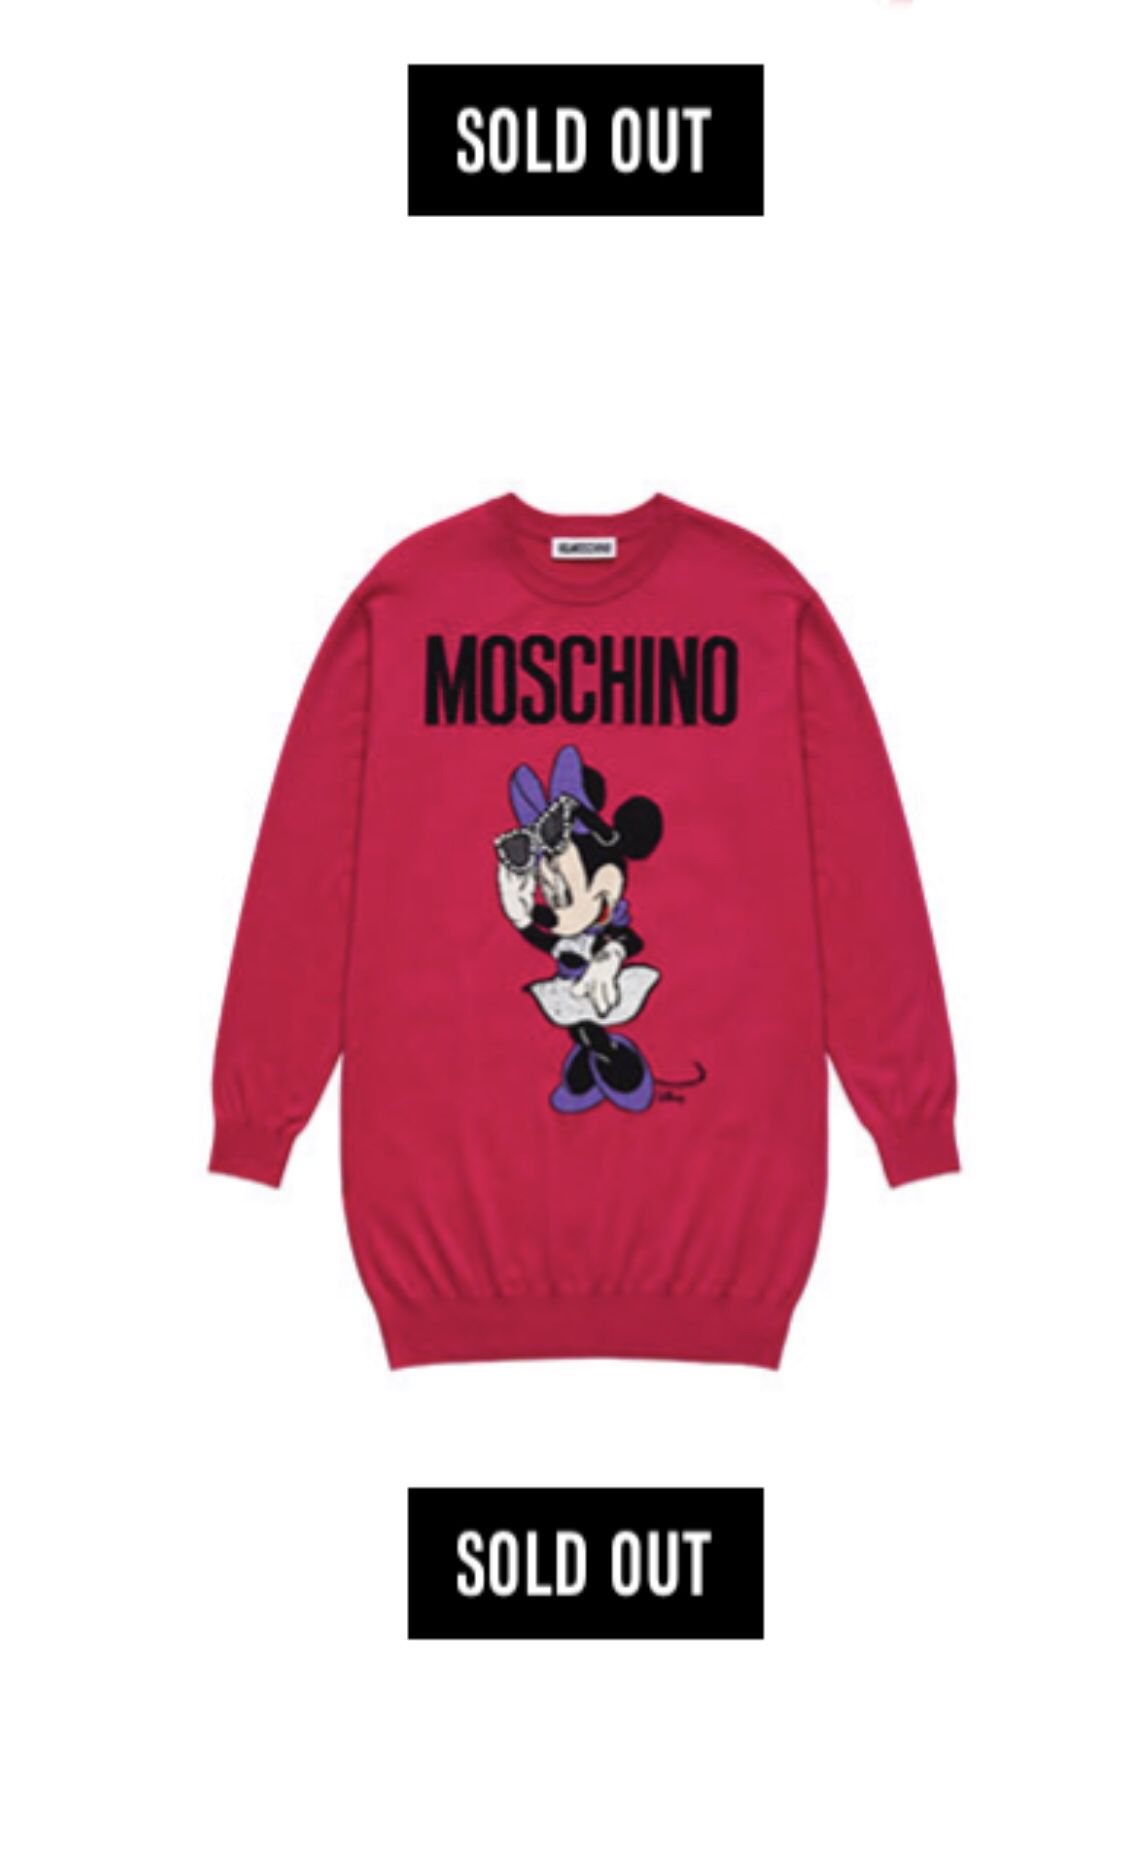 Brand new sealed in bag. Stunning cerise / fuschia pink dress featuring Minnie Mouse from the H&M collab with Moschino.